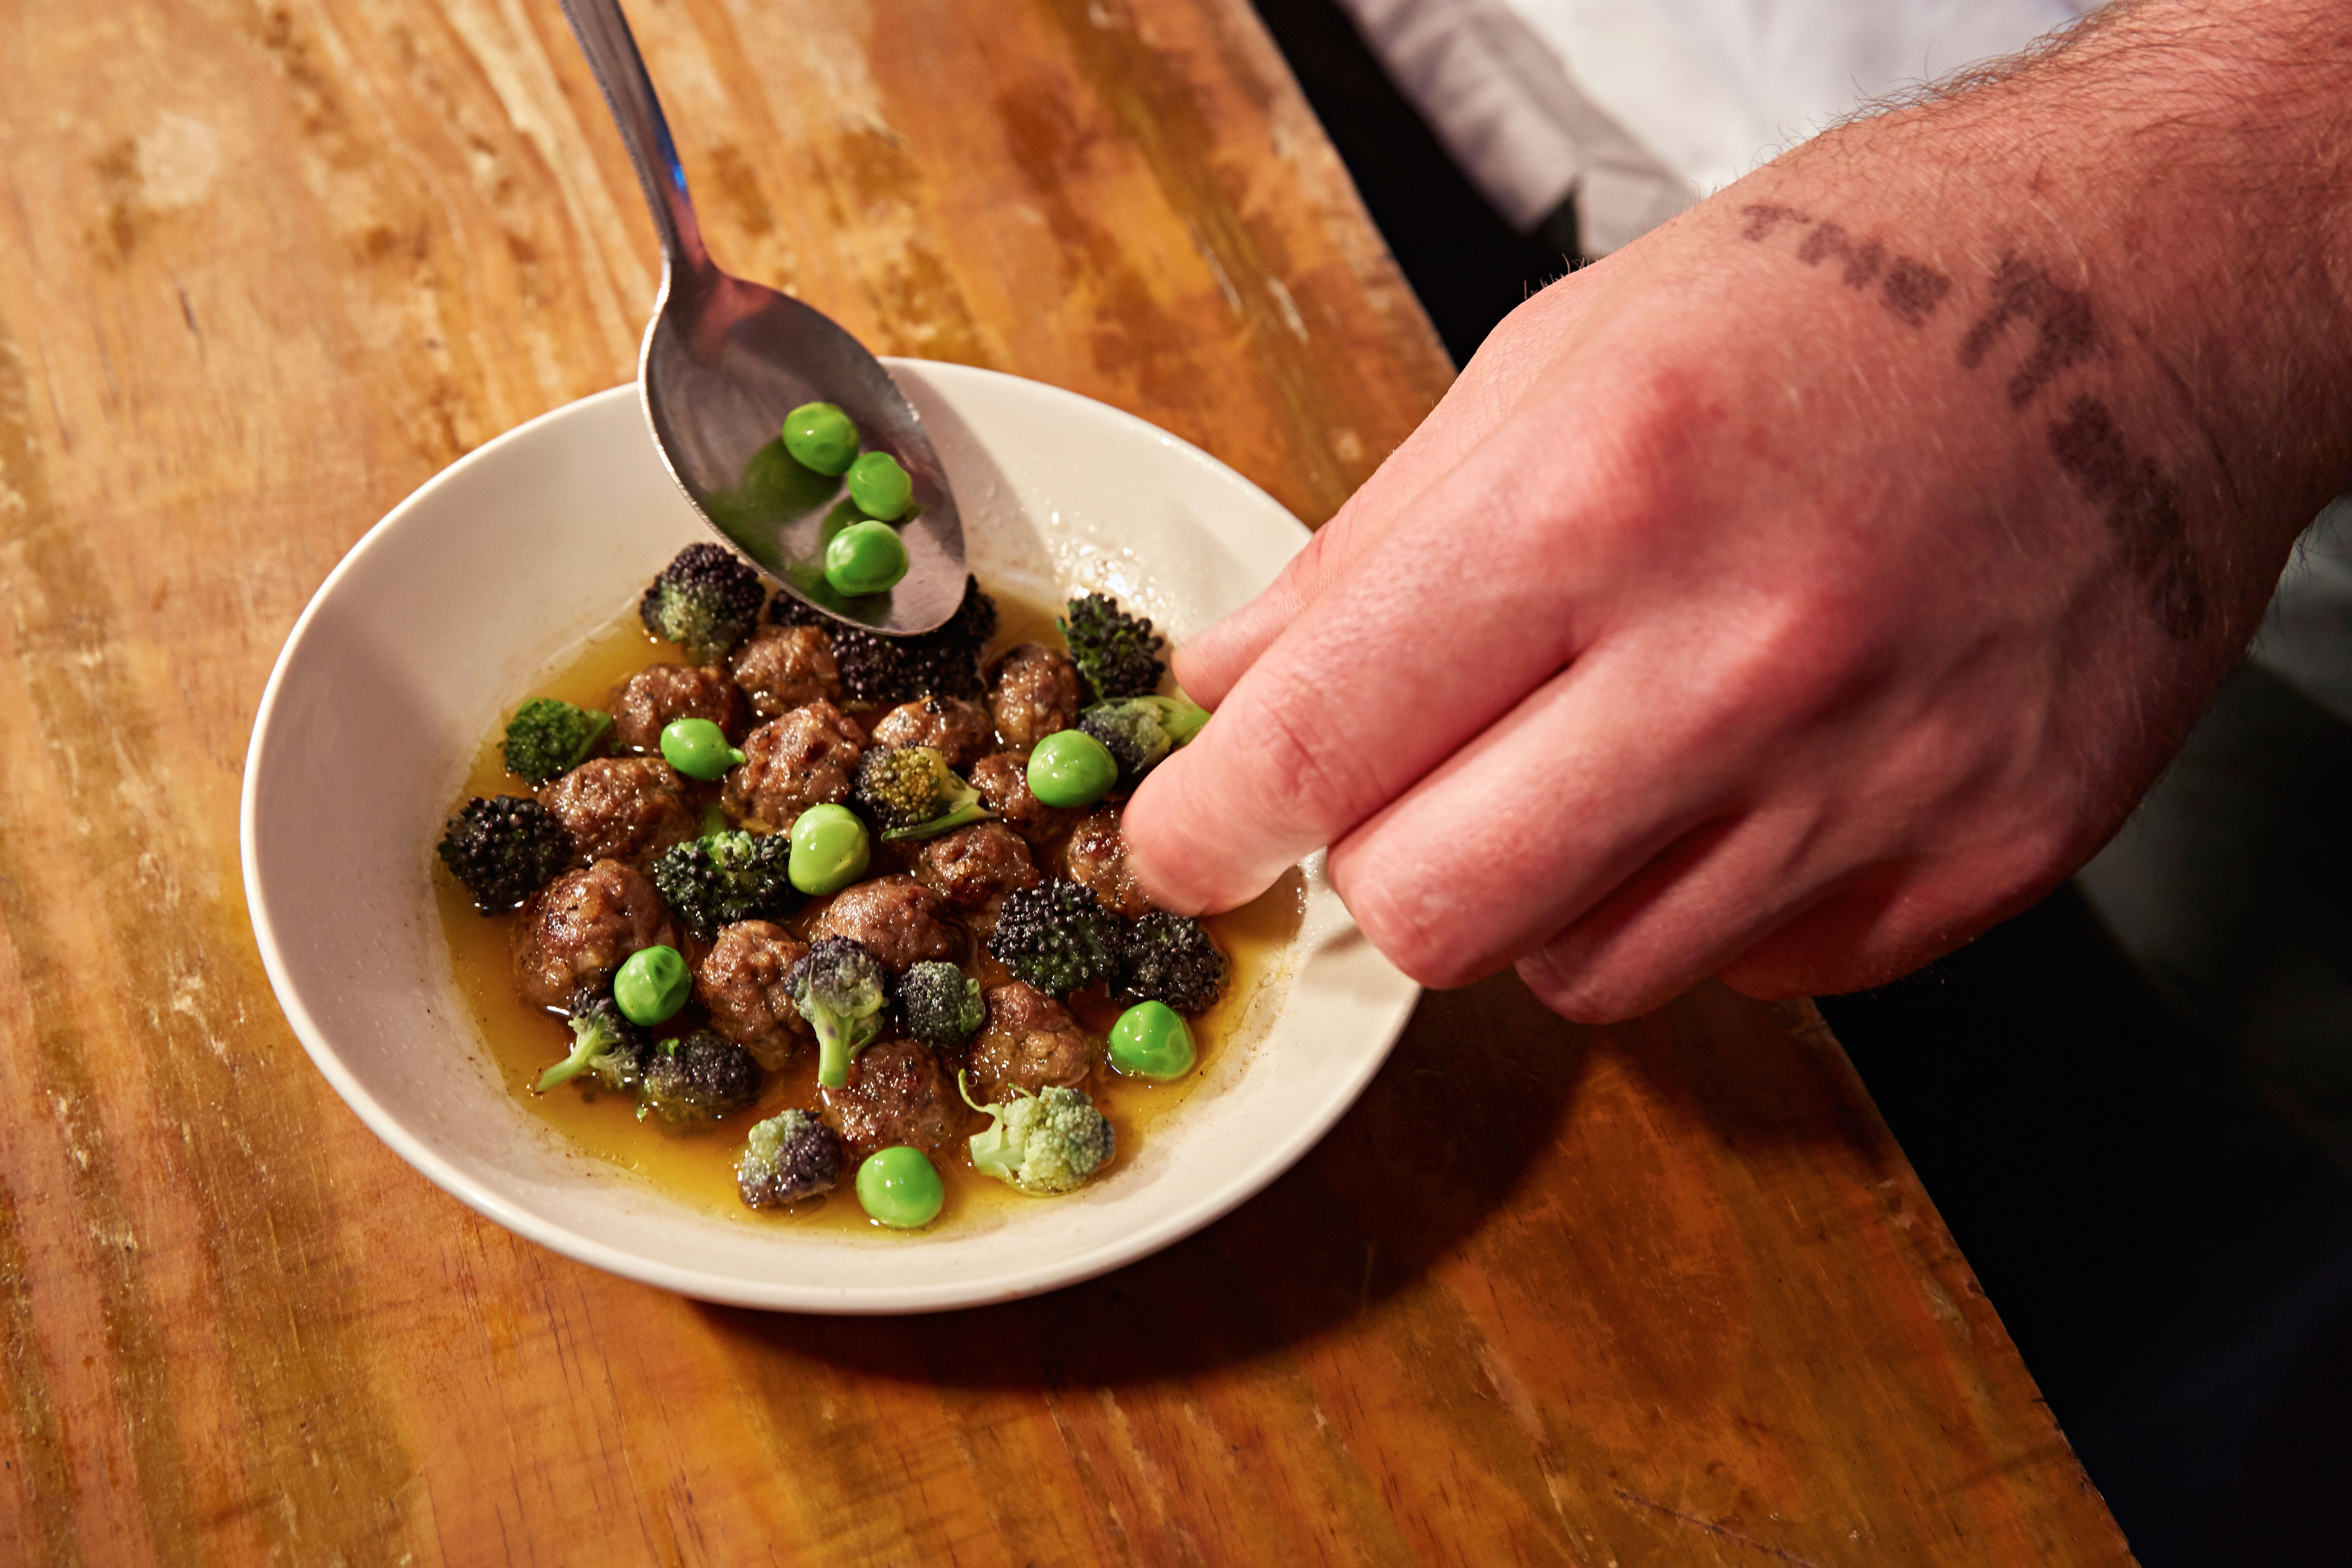 The dish of peas and wild garlic broth and veal balls is delicately prepared